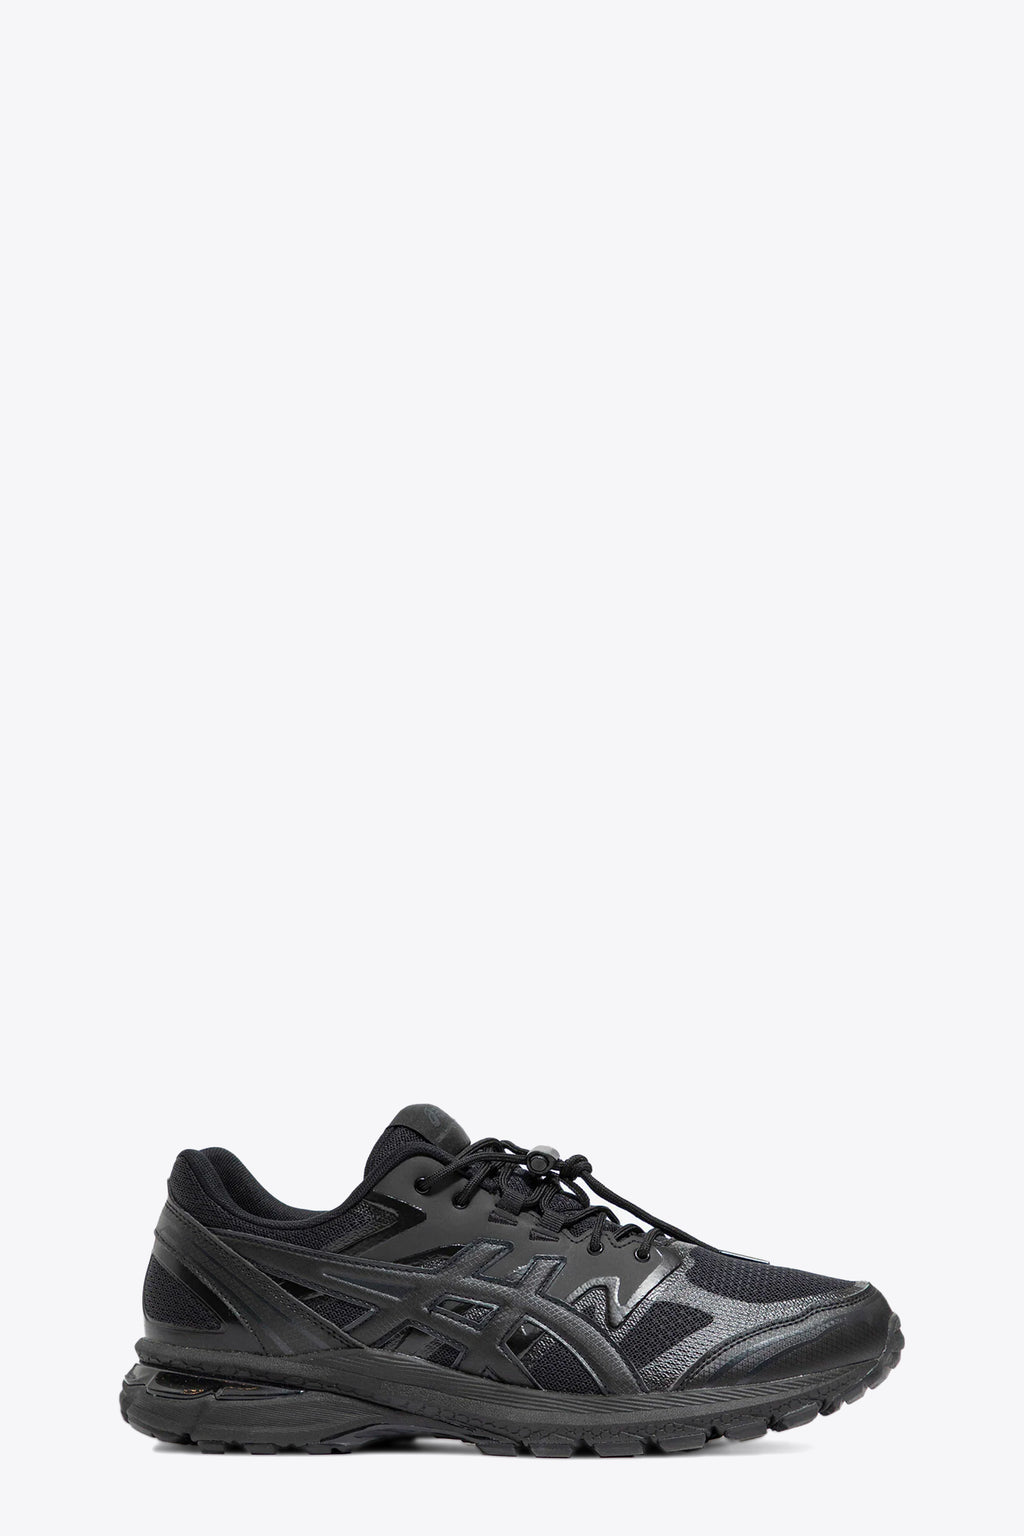 alt-image__Asics-collaboration-black-mesh-and-leather-running-sneaker